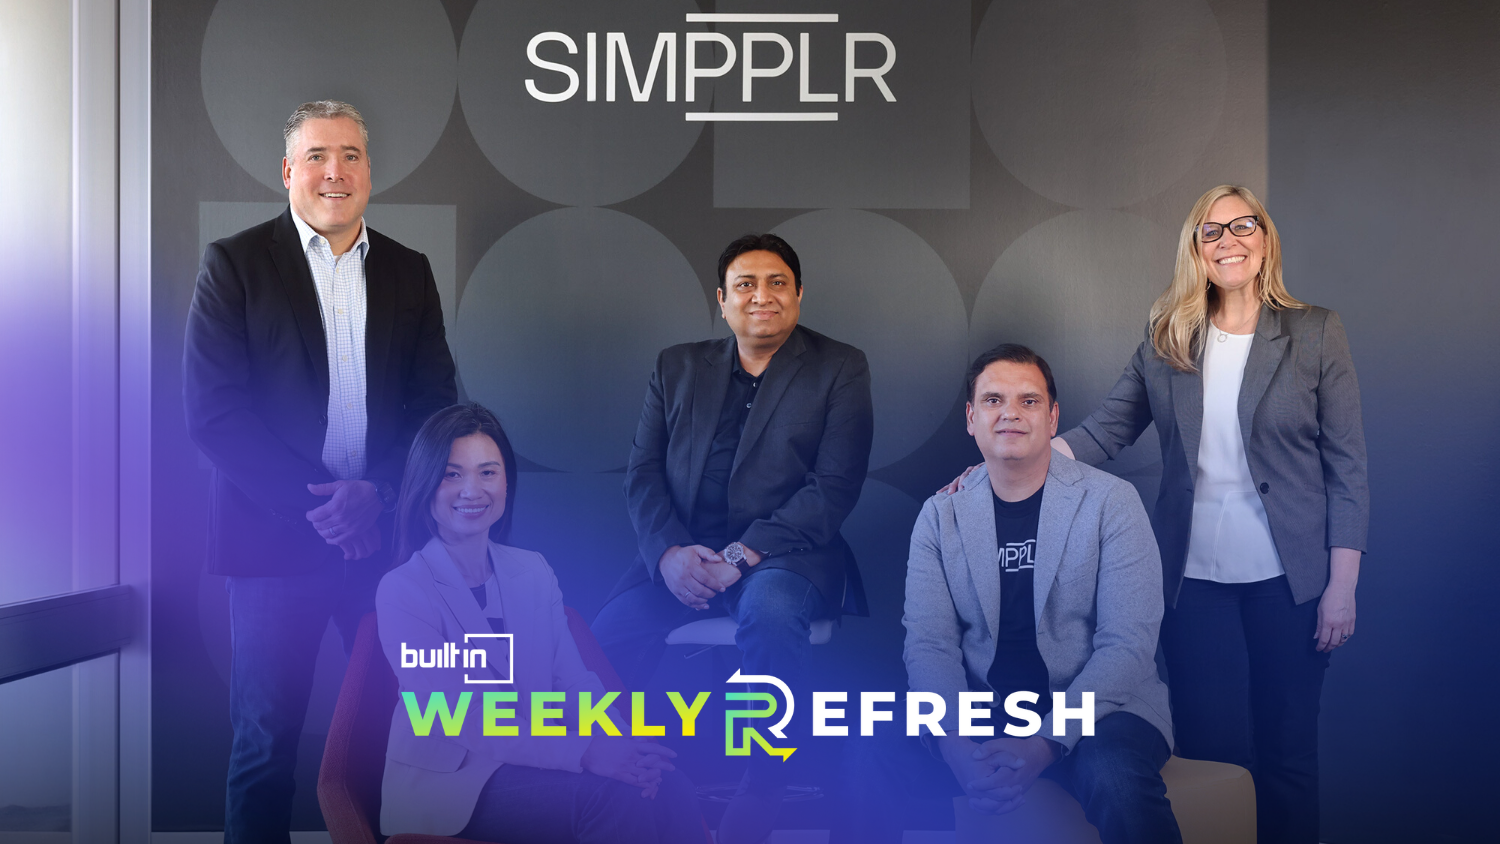 Simpplr employees pose together for a photo.